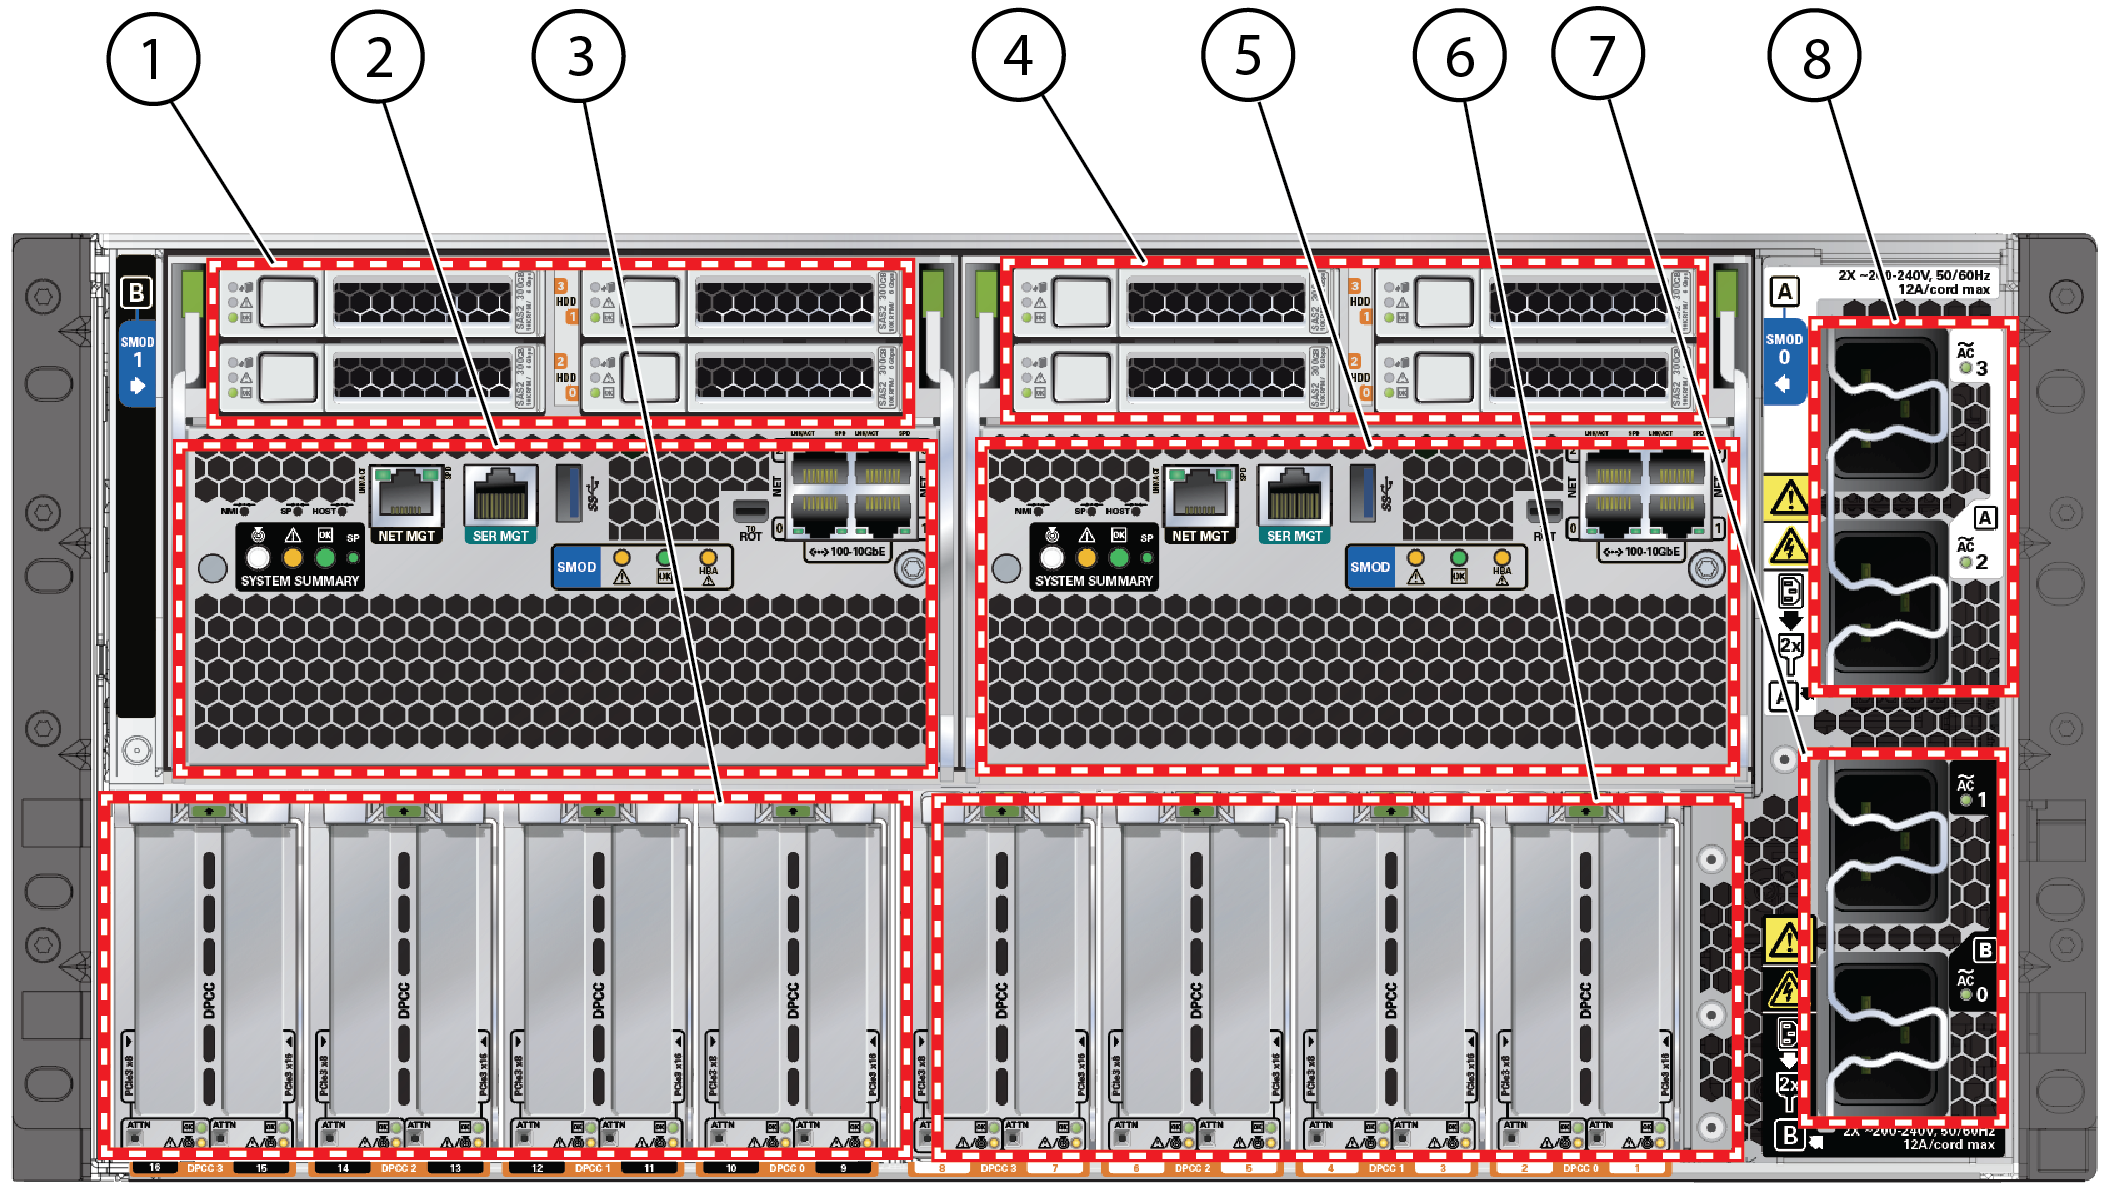 Picture of system back panel with callouts.